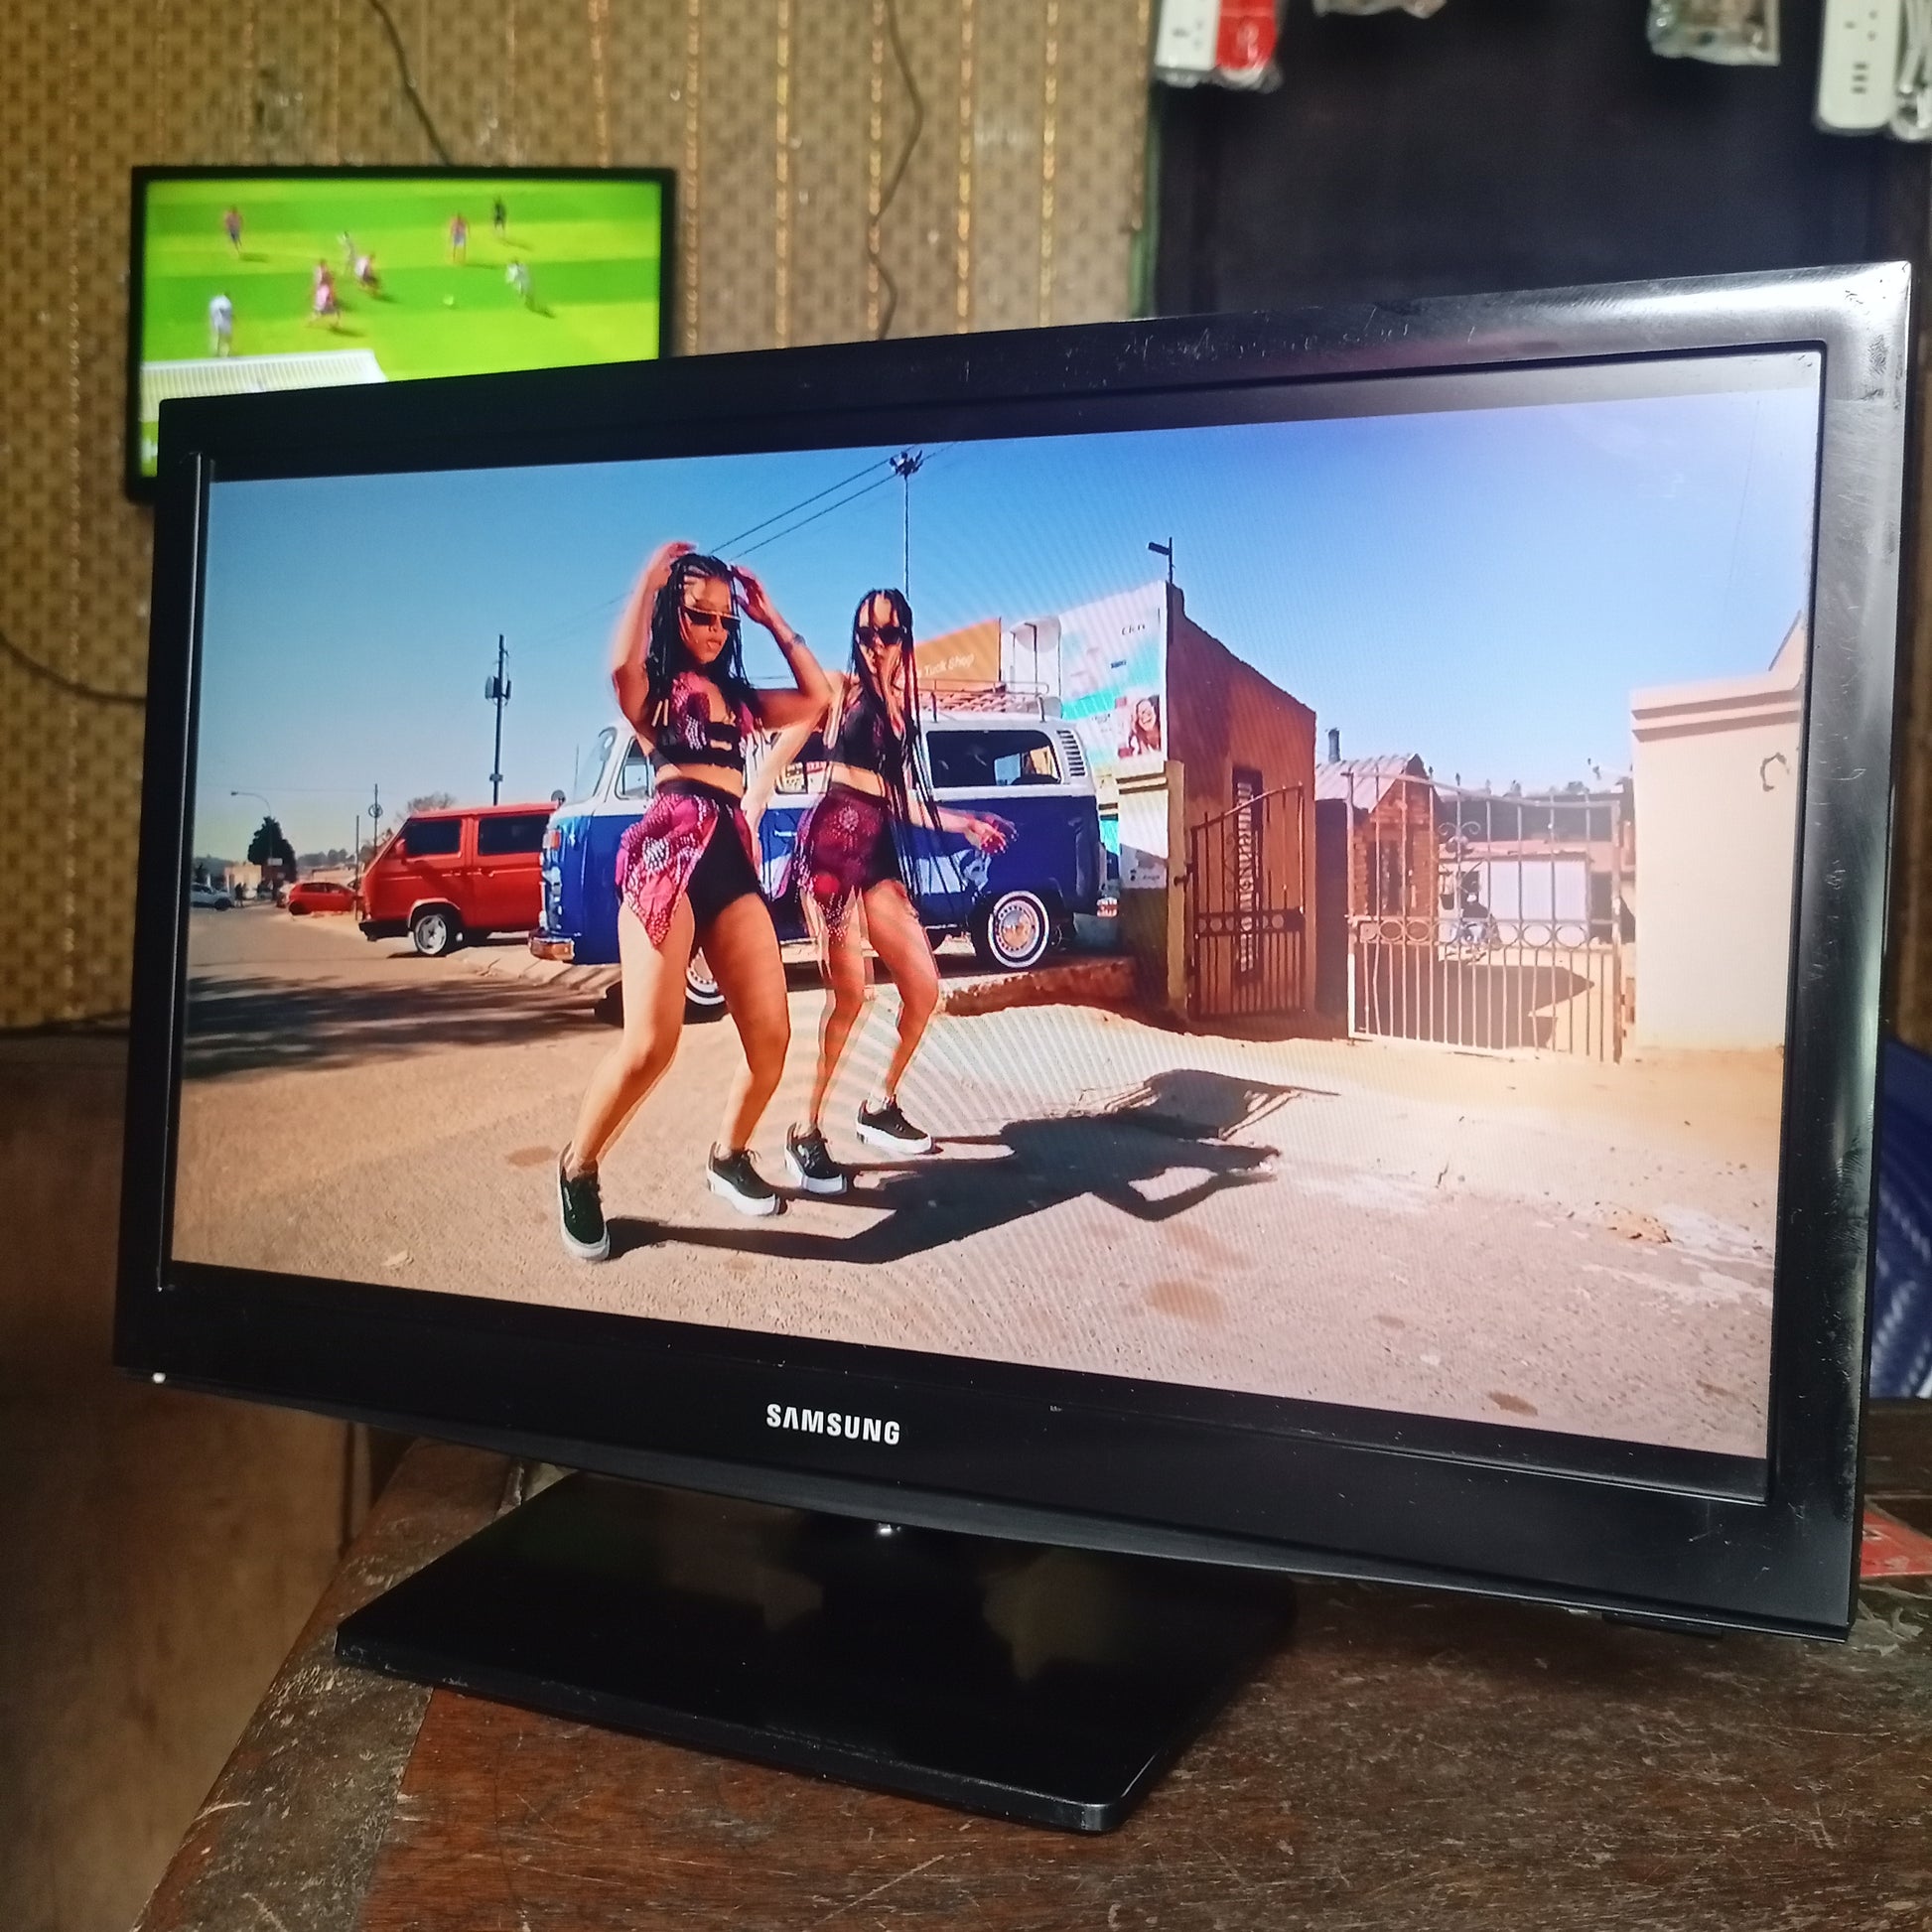 SAMSUNG 19 Inch UE19H4000AW HD Ready LED TV - Front View 